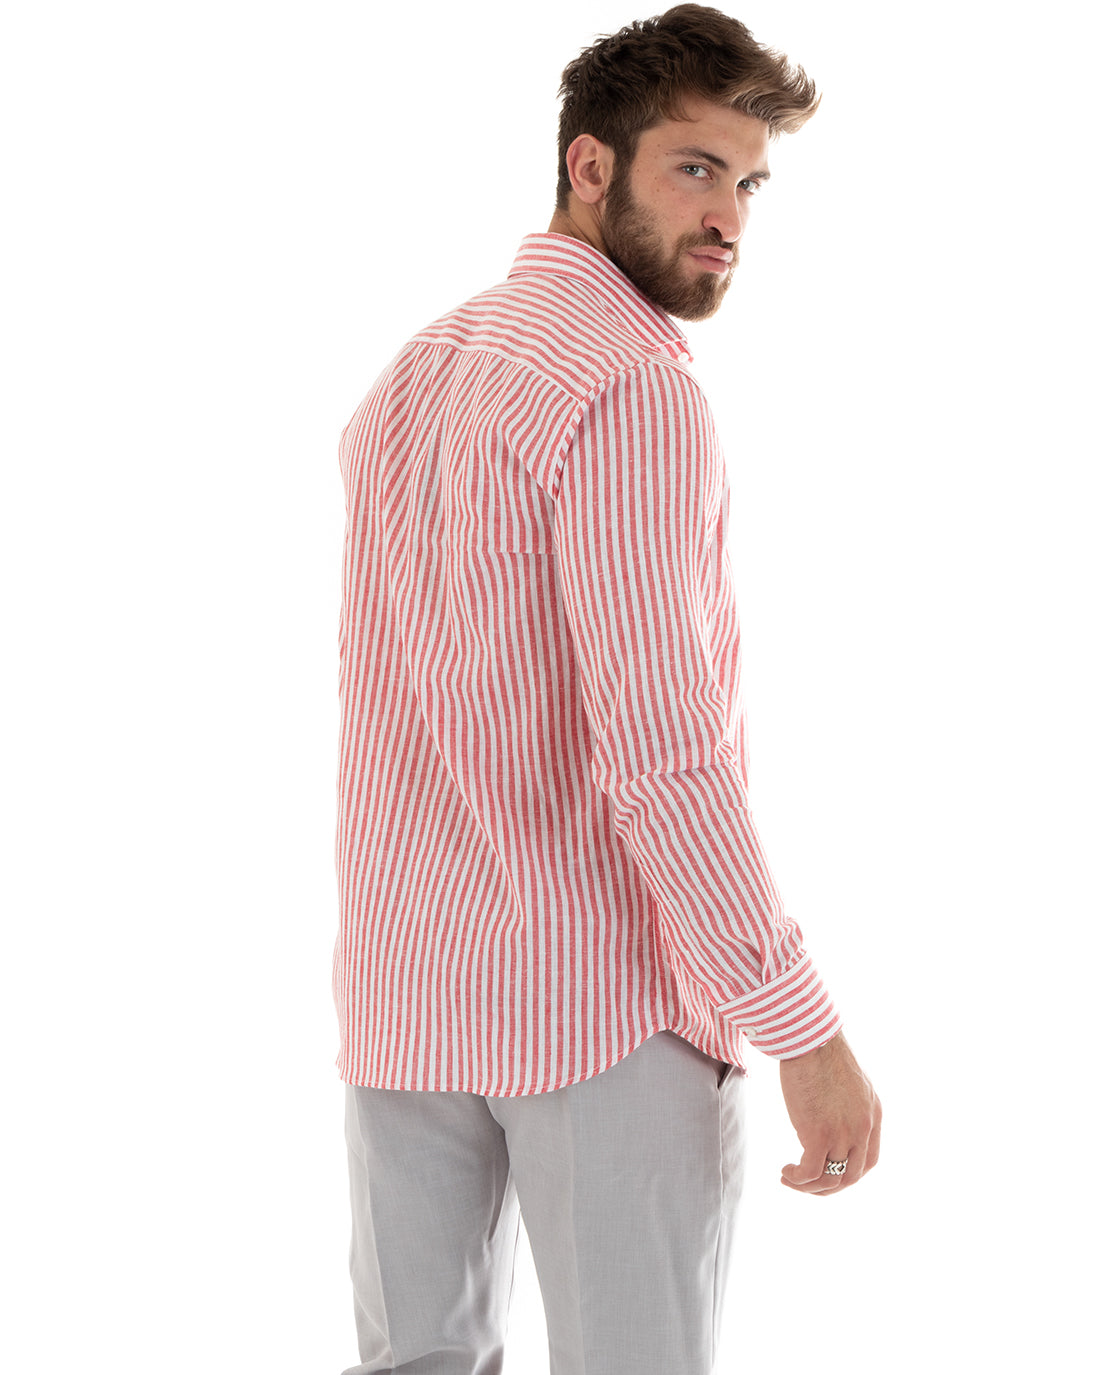 Men's Shirt With Tailored French Collar Long Sleeve Linen Narrow Striped Red GIOSAL-C2690A